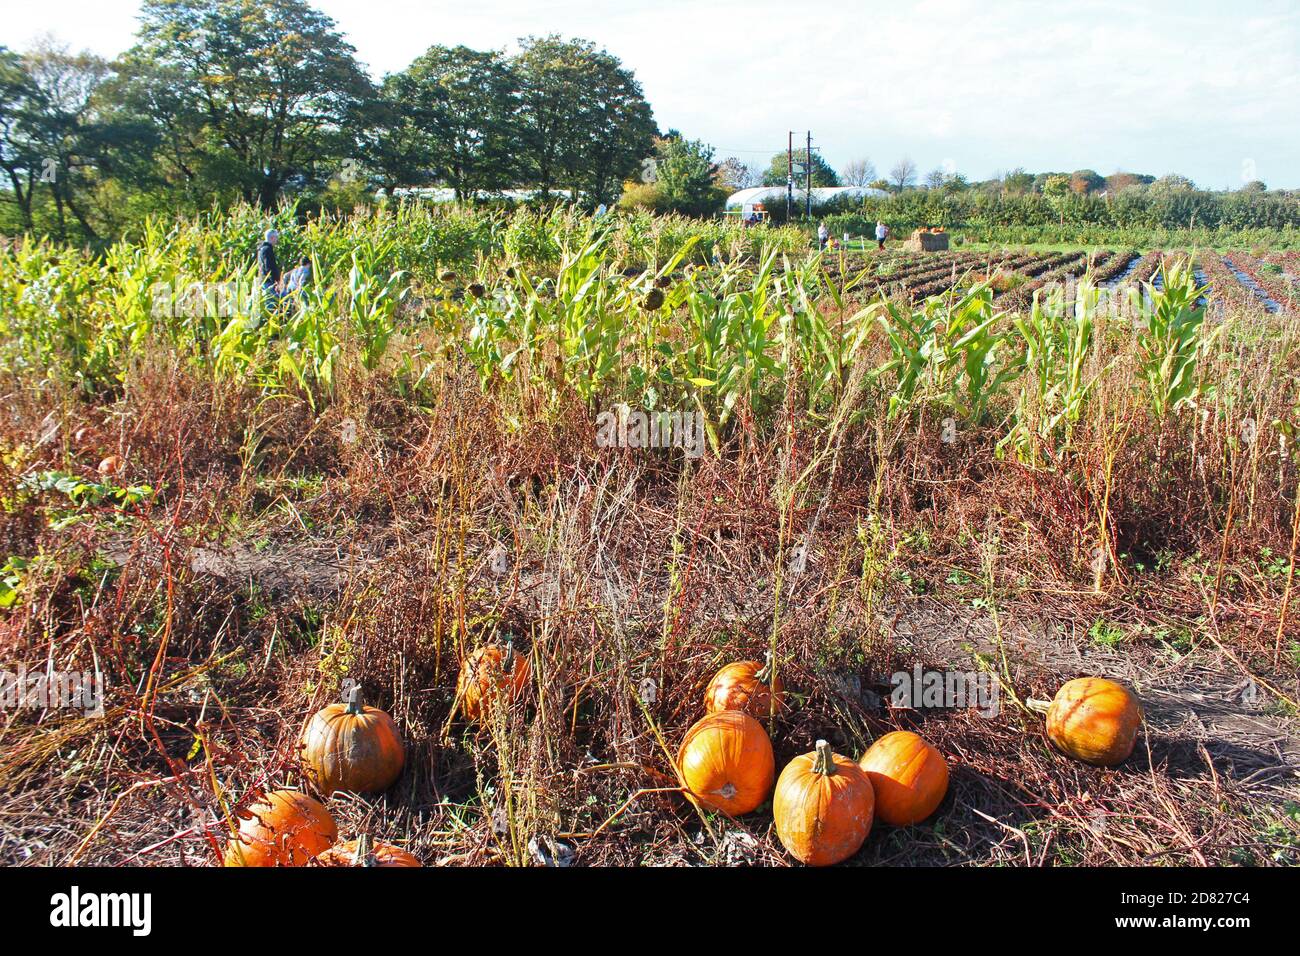 Pumpkin picking in a dying field of pumpkins plants on Kenyon Hall Farm, England Stock Photo